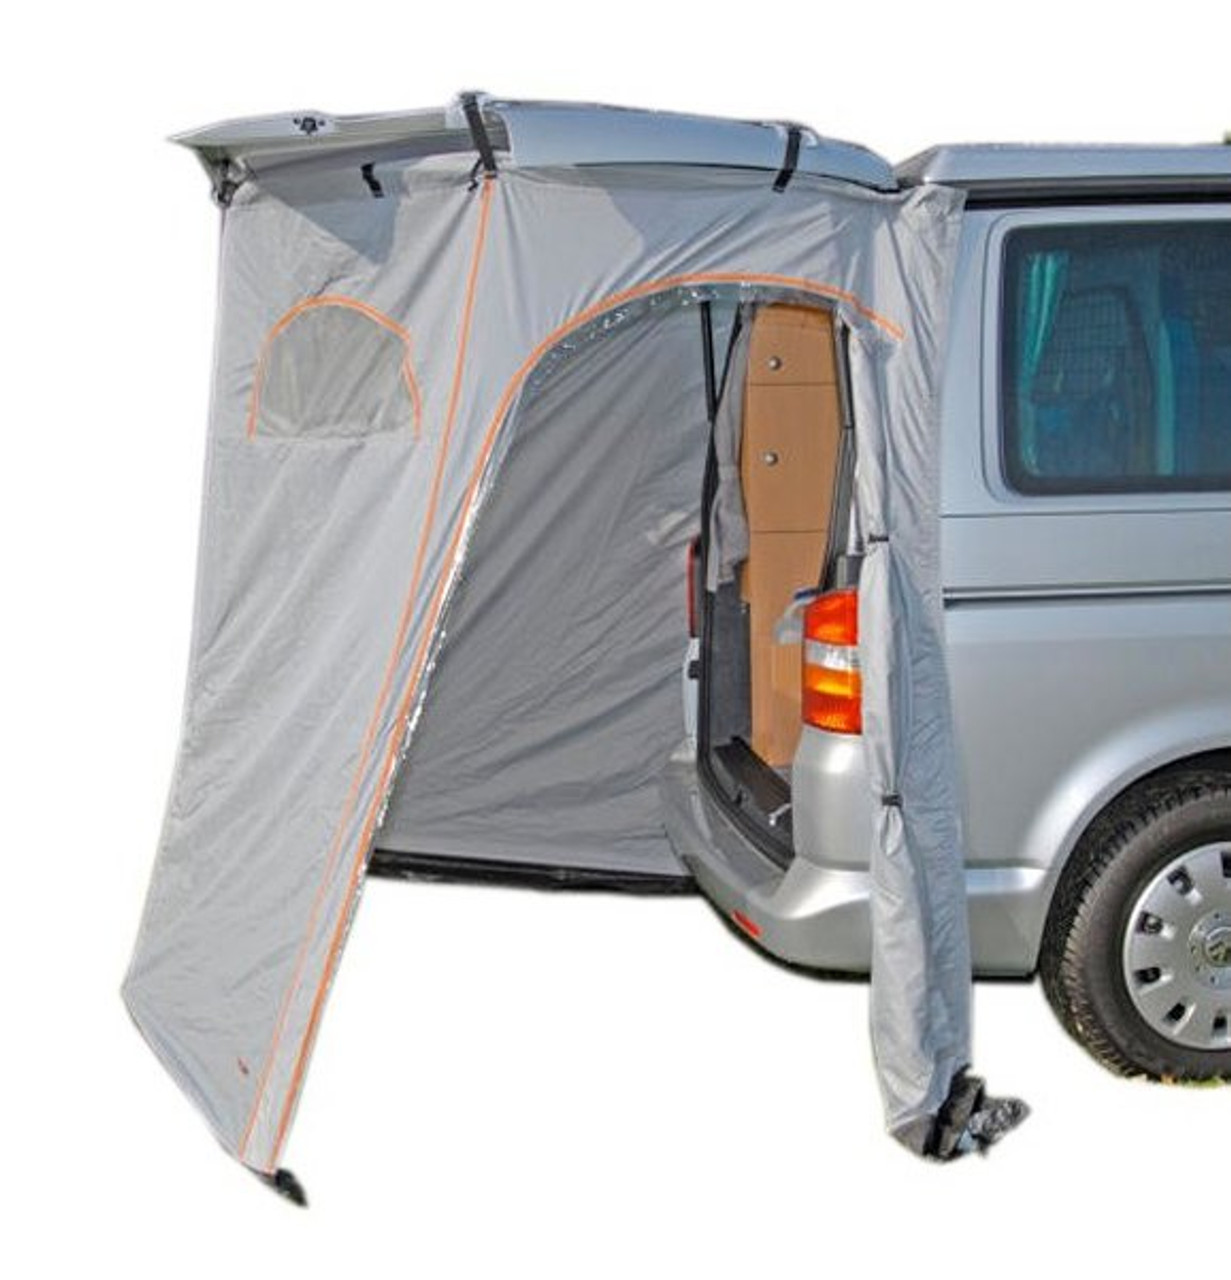 Volkswagen Original VW Tail Gate Tent Shower Cubicle T5 T6 Multifunctional Tent 